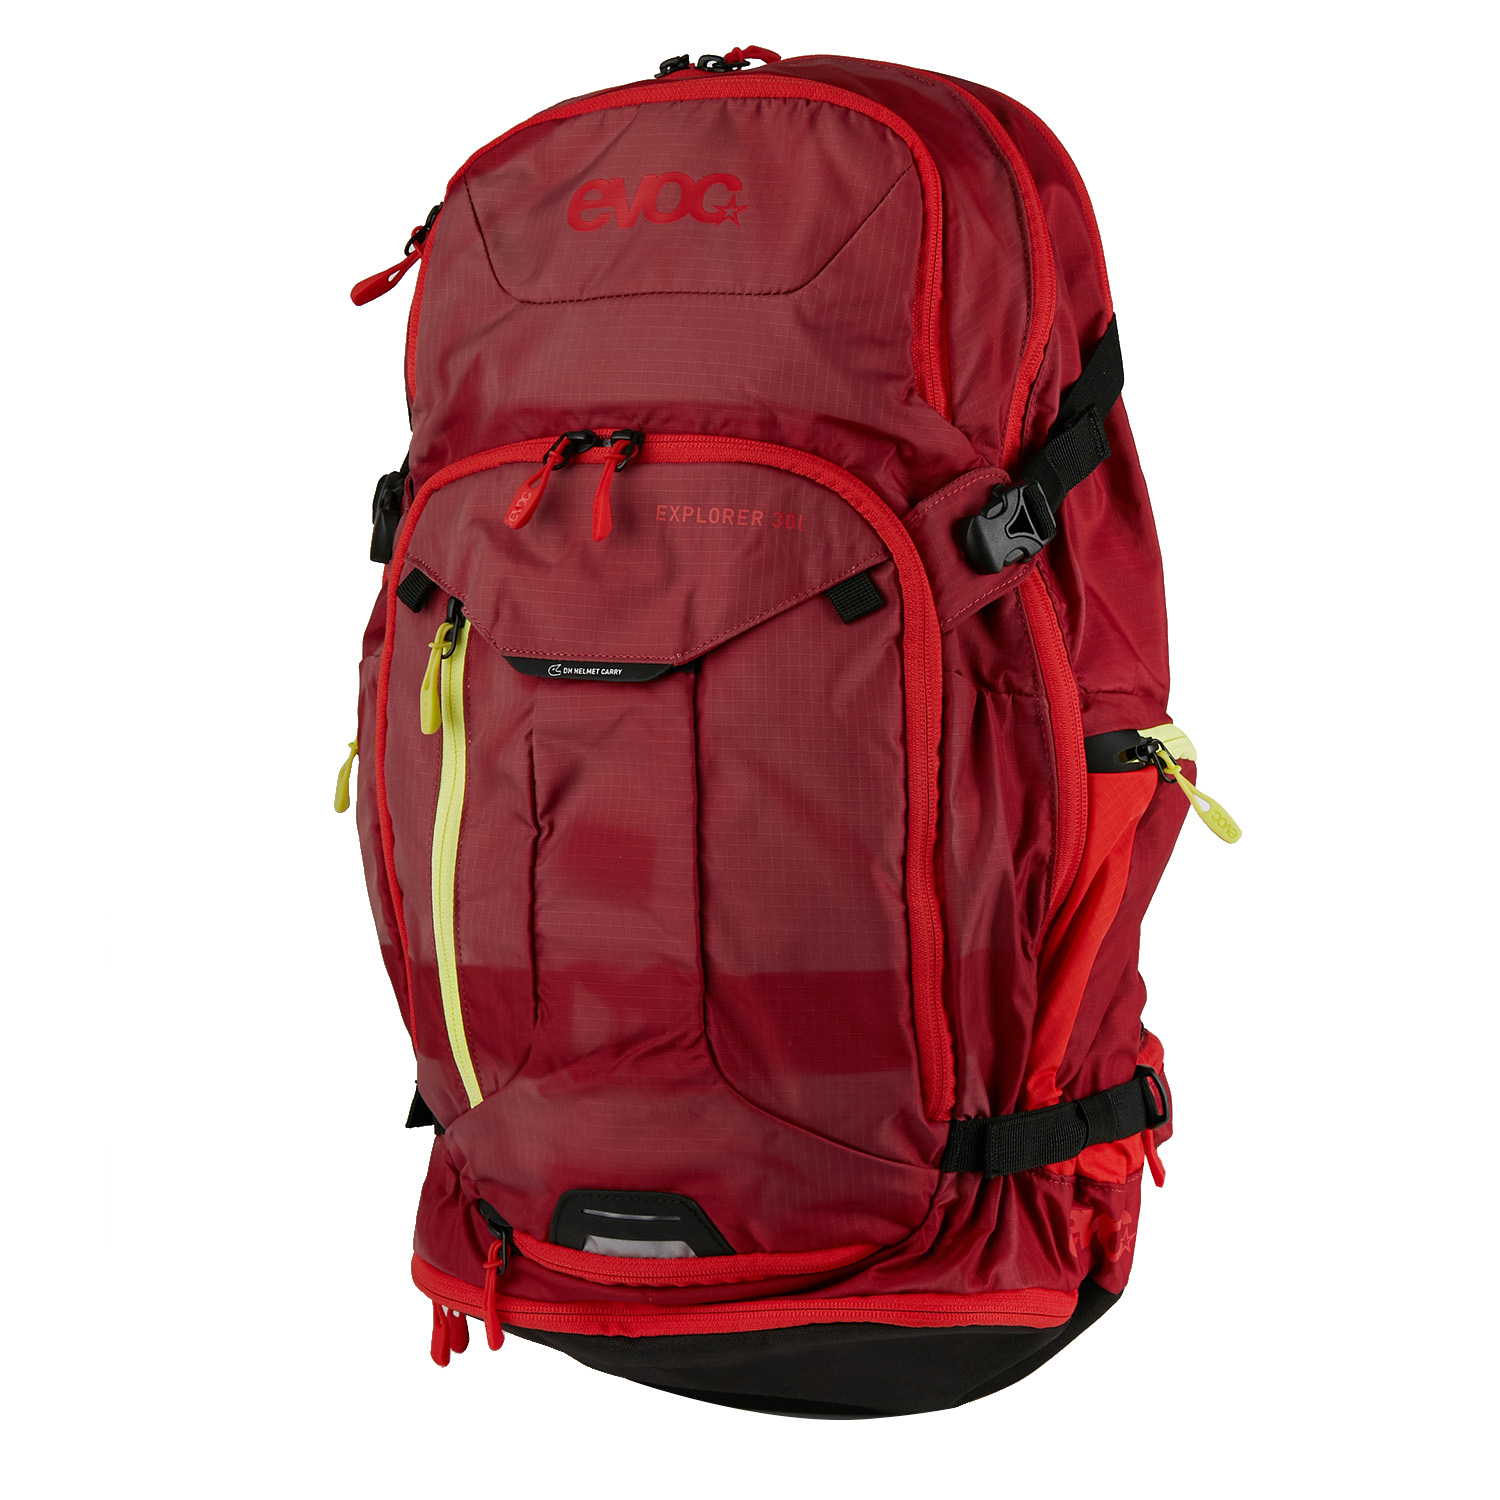 Evoc Backpack with Hydration System Compartment Explorer Ruby, 30 Liter - Second Hand